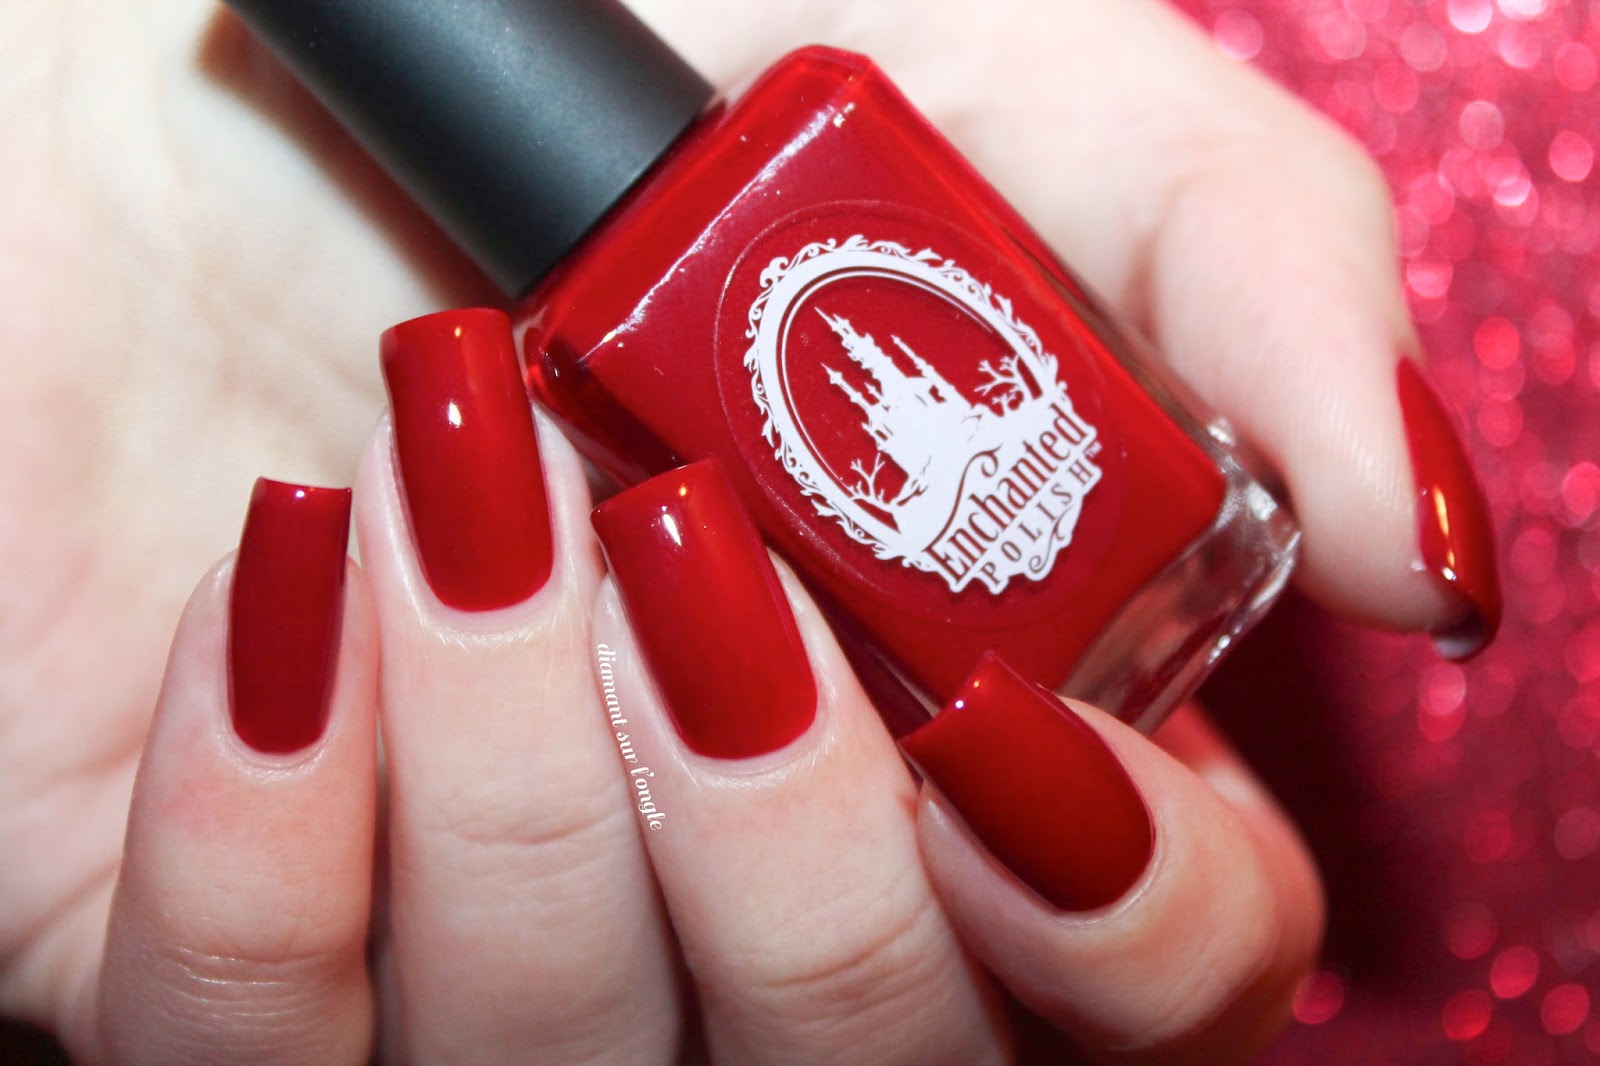 Swatch of the nail polish "Valentine" from Enchanted Polish